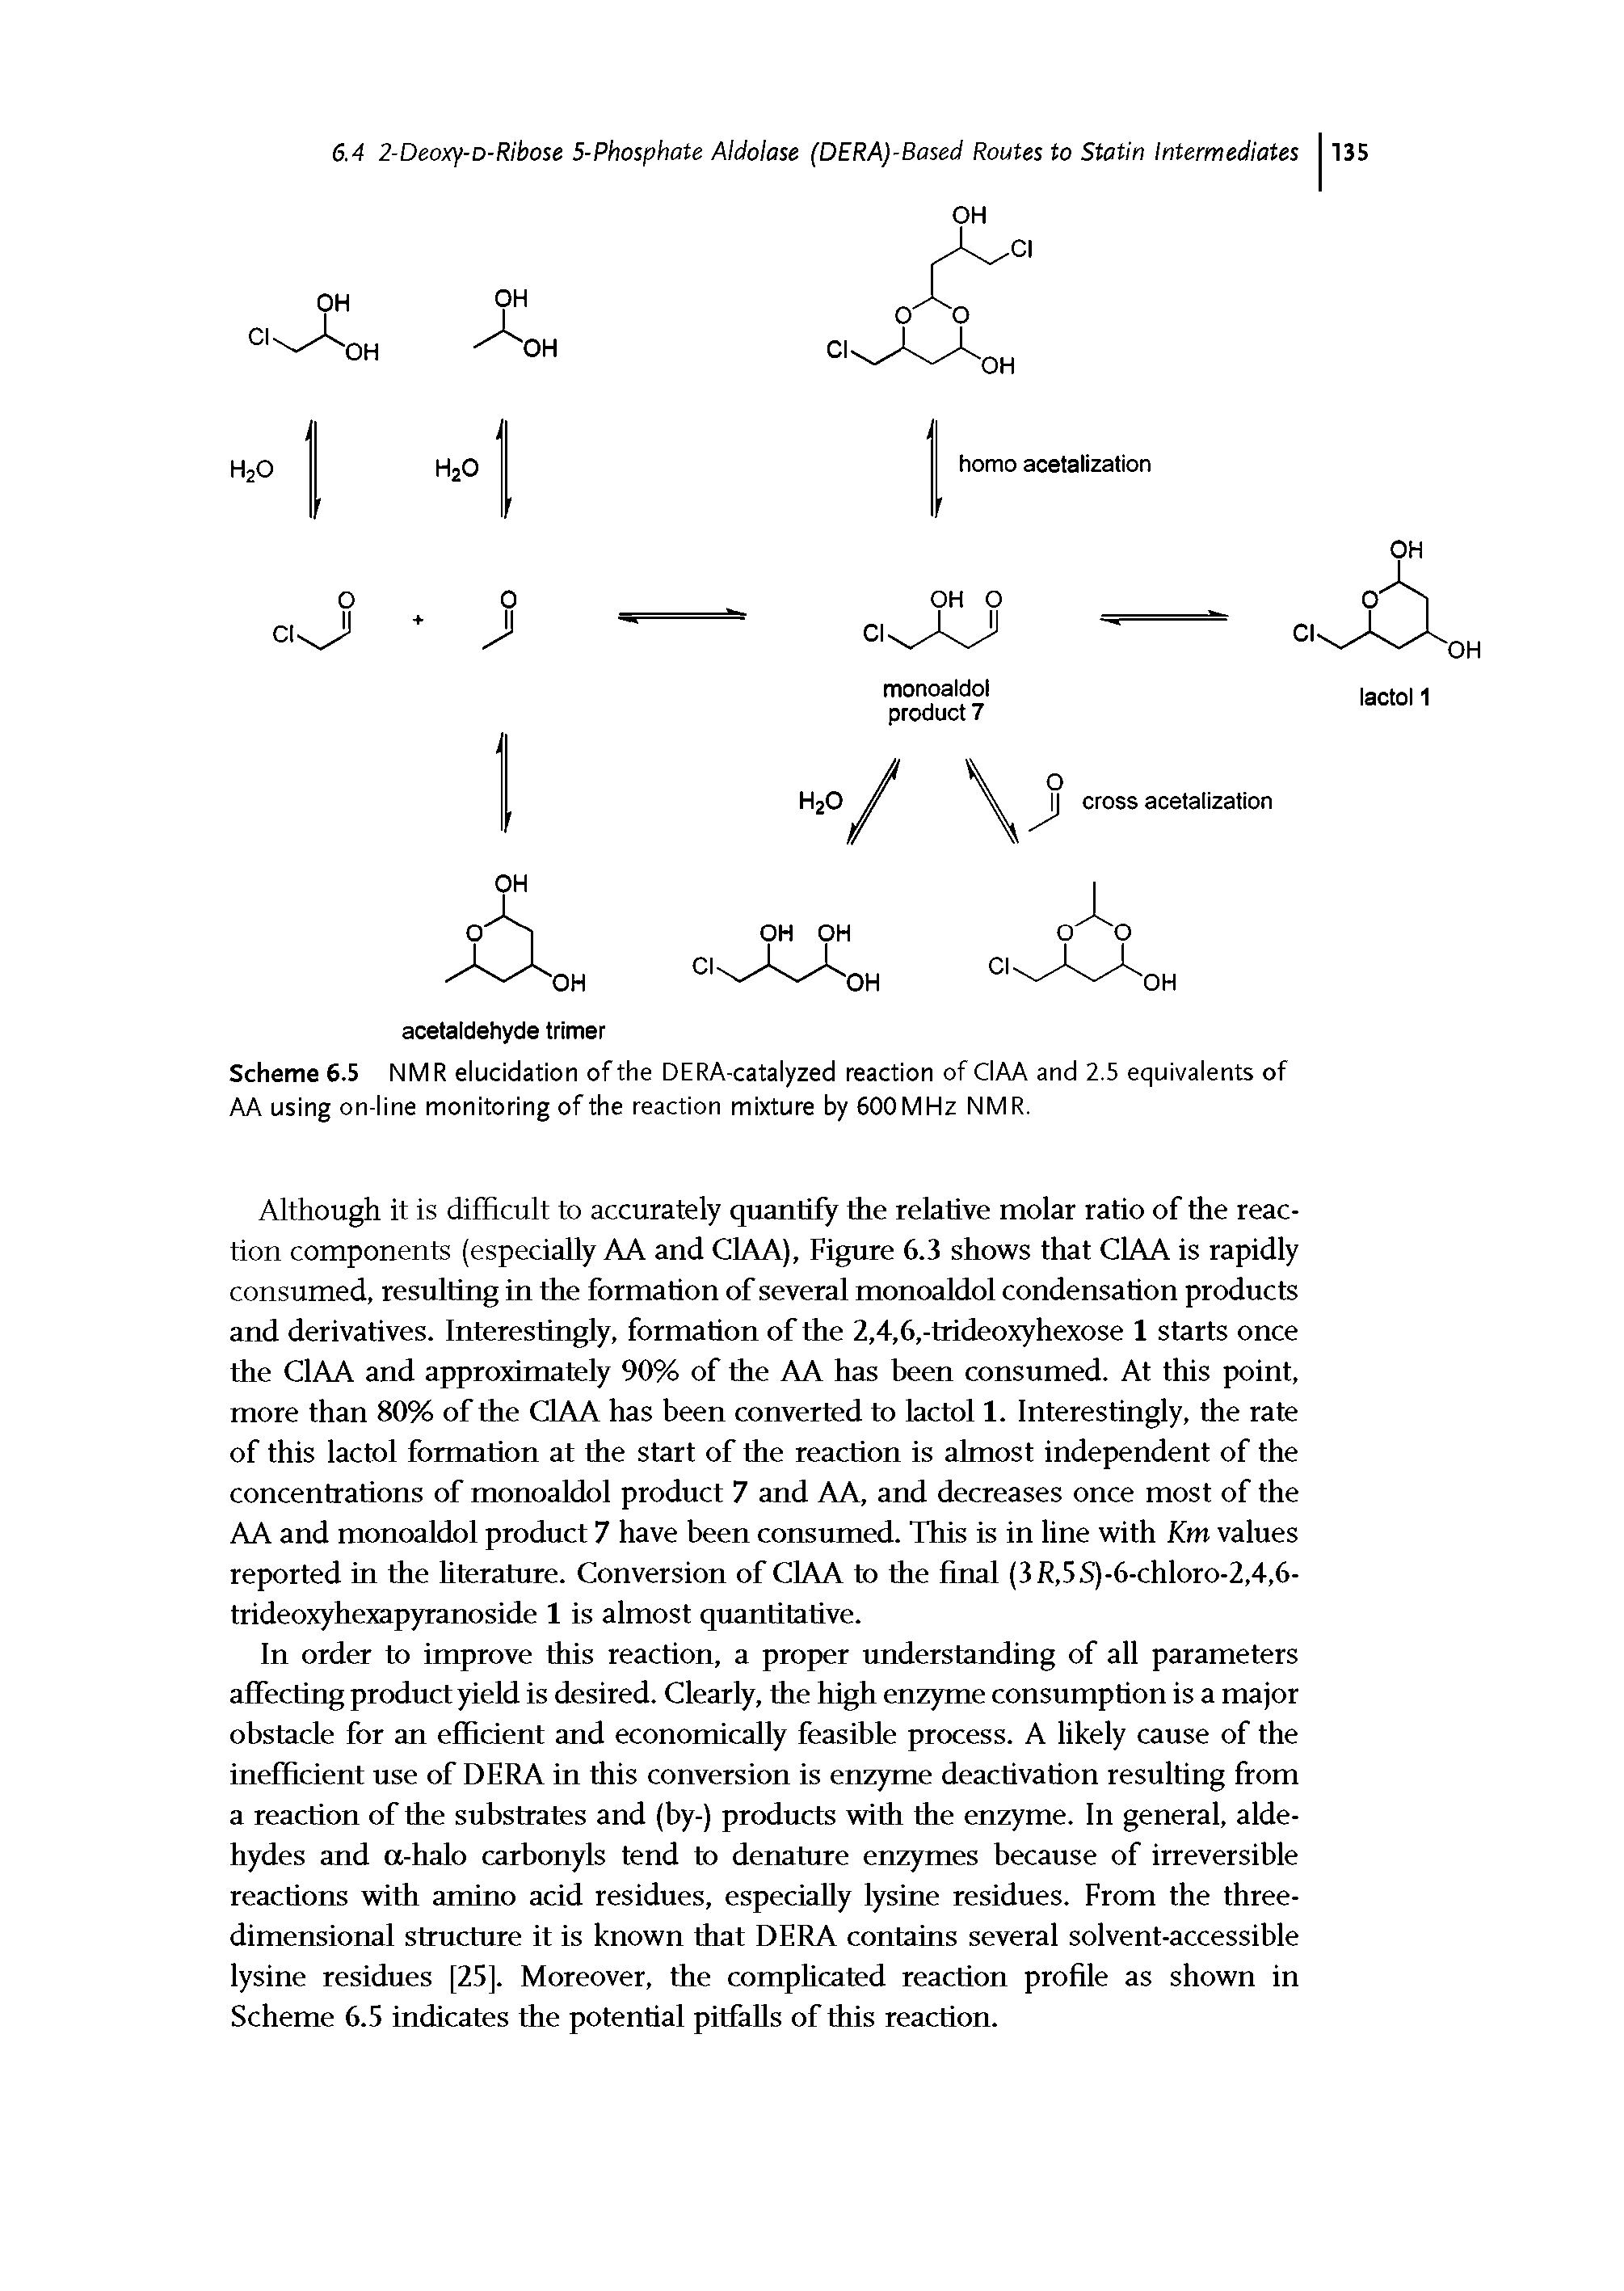 Scheme 6.5 NMR elucidation of the DERA-catalyzed reaction of CIAA and 2.5 equivalents of AA using on-line monitoring of the reaction mixture by 600MHz NMR.